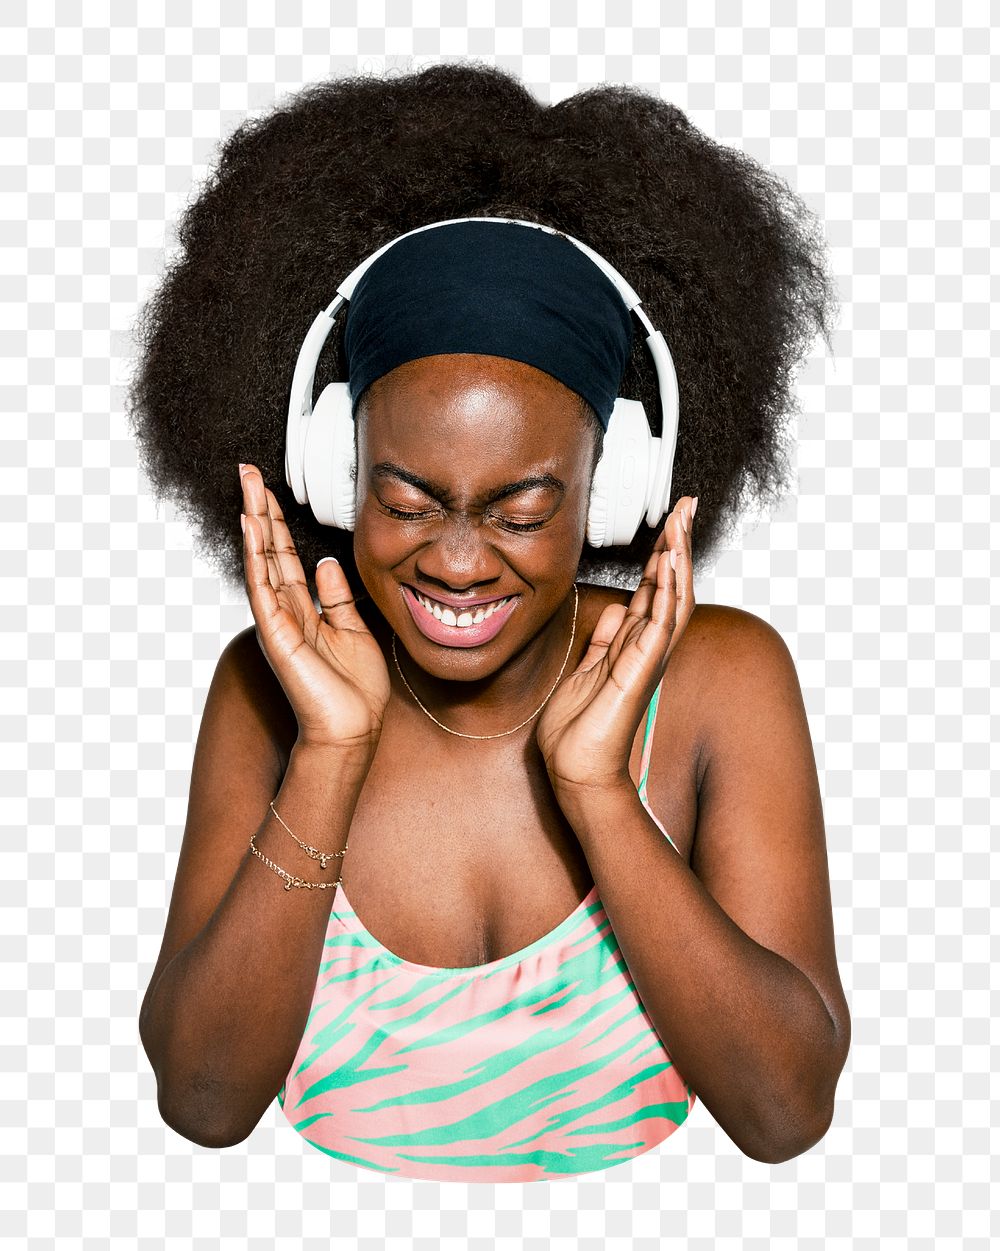 Png woman listen to music sticker, transparent background